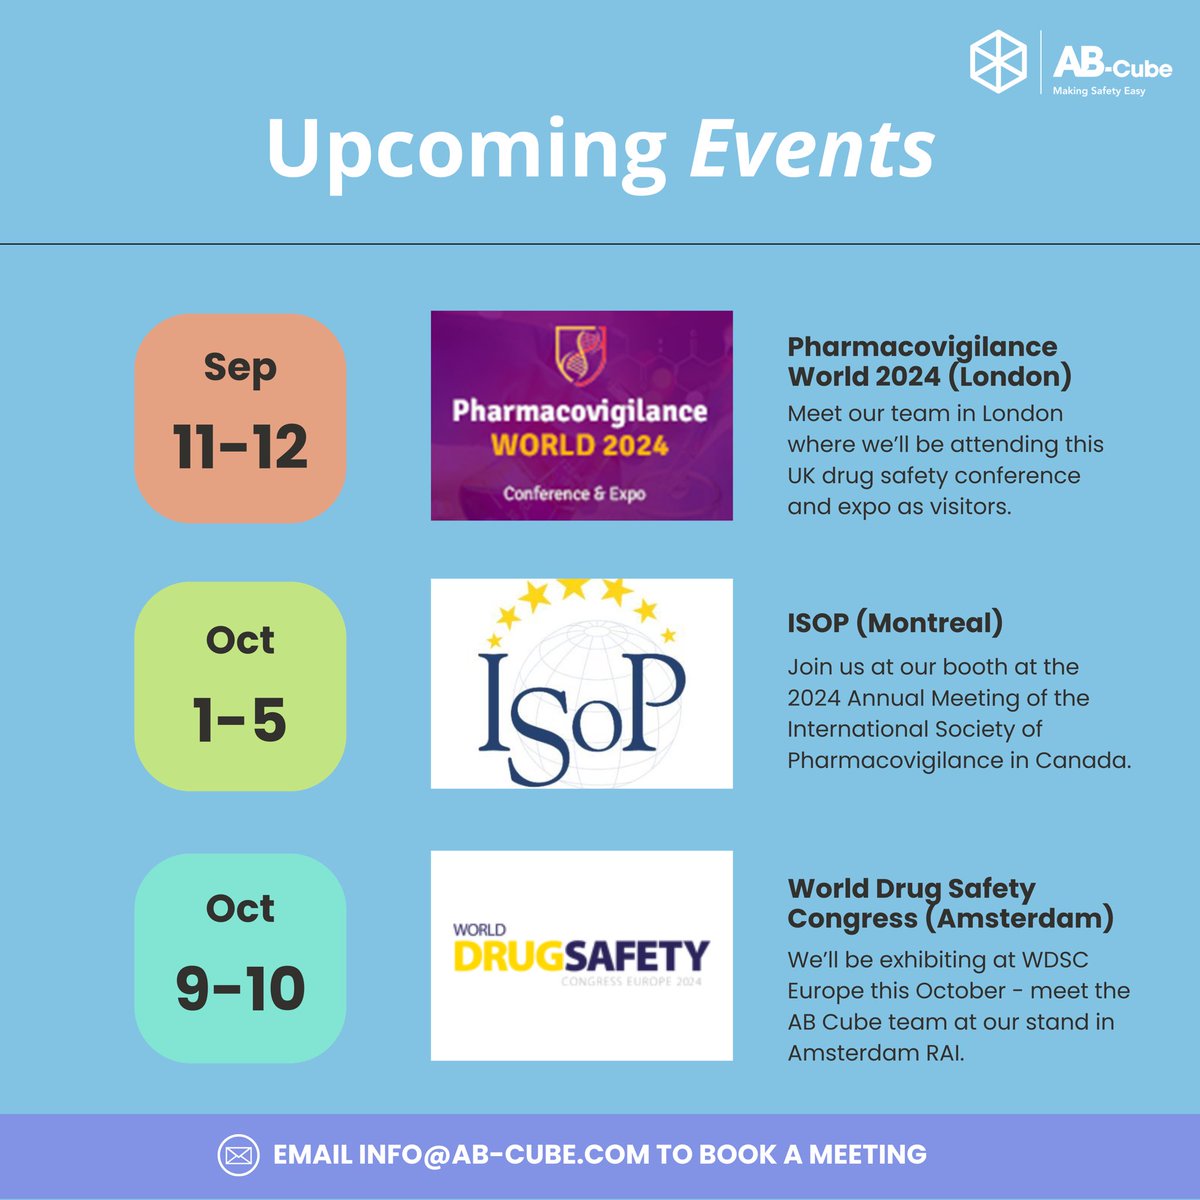 📅SAVE THE DATE - UPCOMING 2024 EVENTS!   Meet the AB Cube team: 🔹Pharmacovigilance World 2024 (London, Sep 11-12) 🔹ISOP (Montreal, Oct 1-5) 🔹World Drug Safety Congress Europe (Amsterdam, Oct 9-10) We look forward to seeing you! #pharmacovigilance #drugsafety